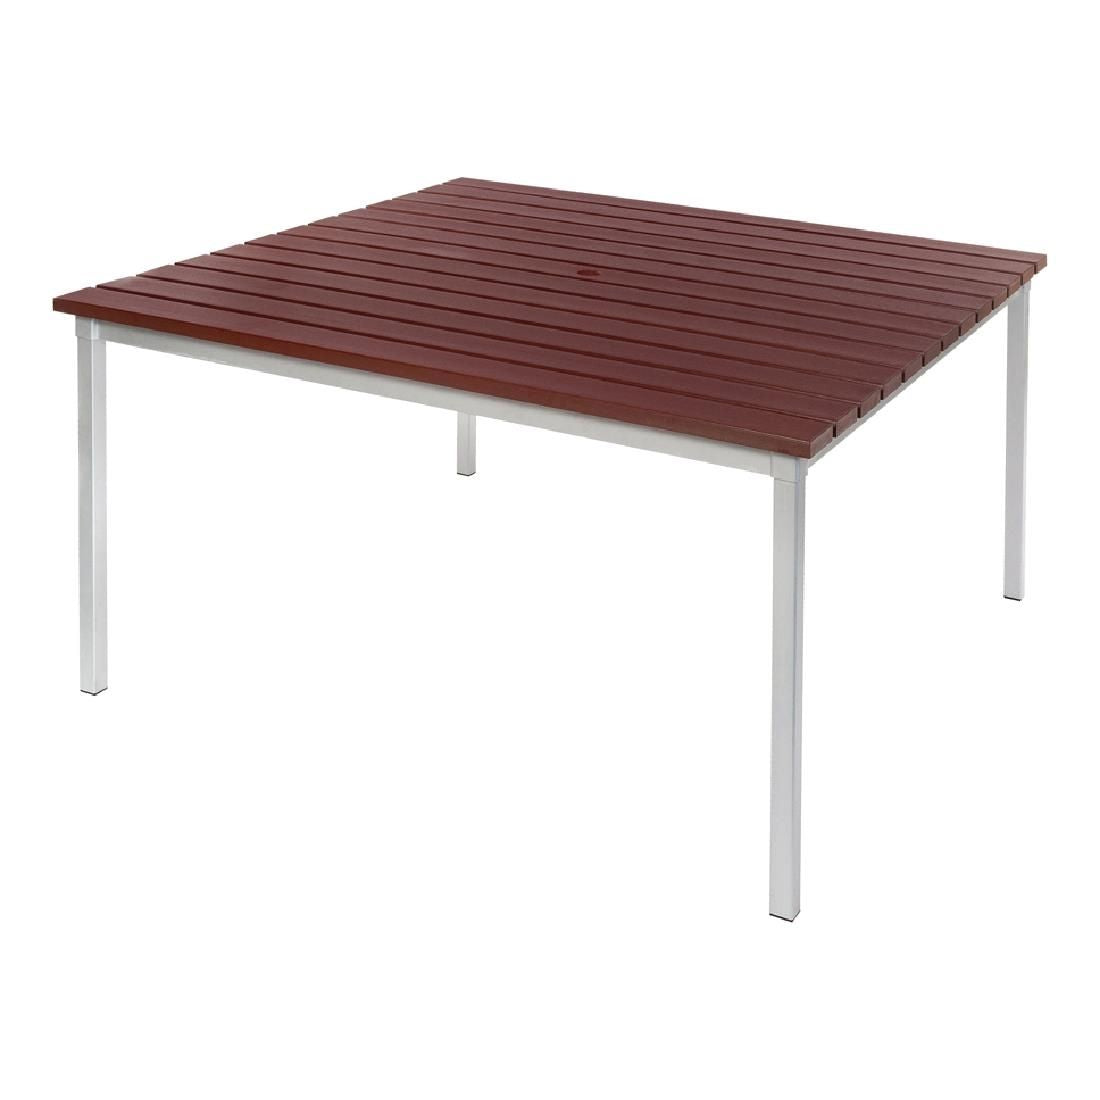 GoPak Enviro Square Outdoor Walnut Effect Faux Wood Table 1250mm JD Catering Equipment Solutions Ltd